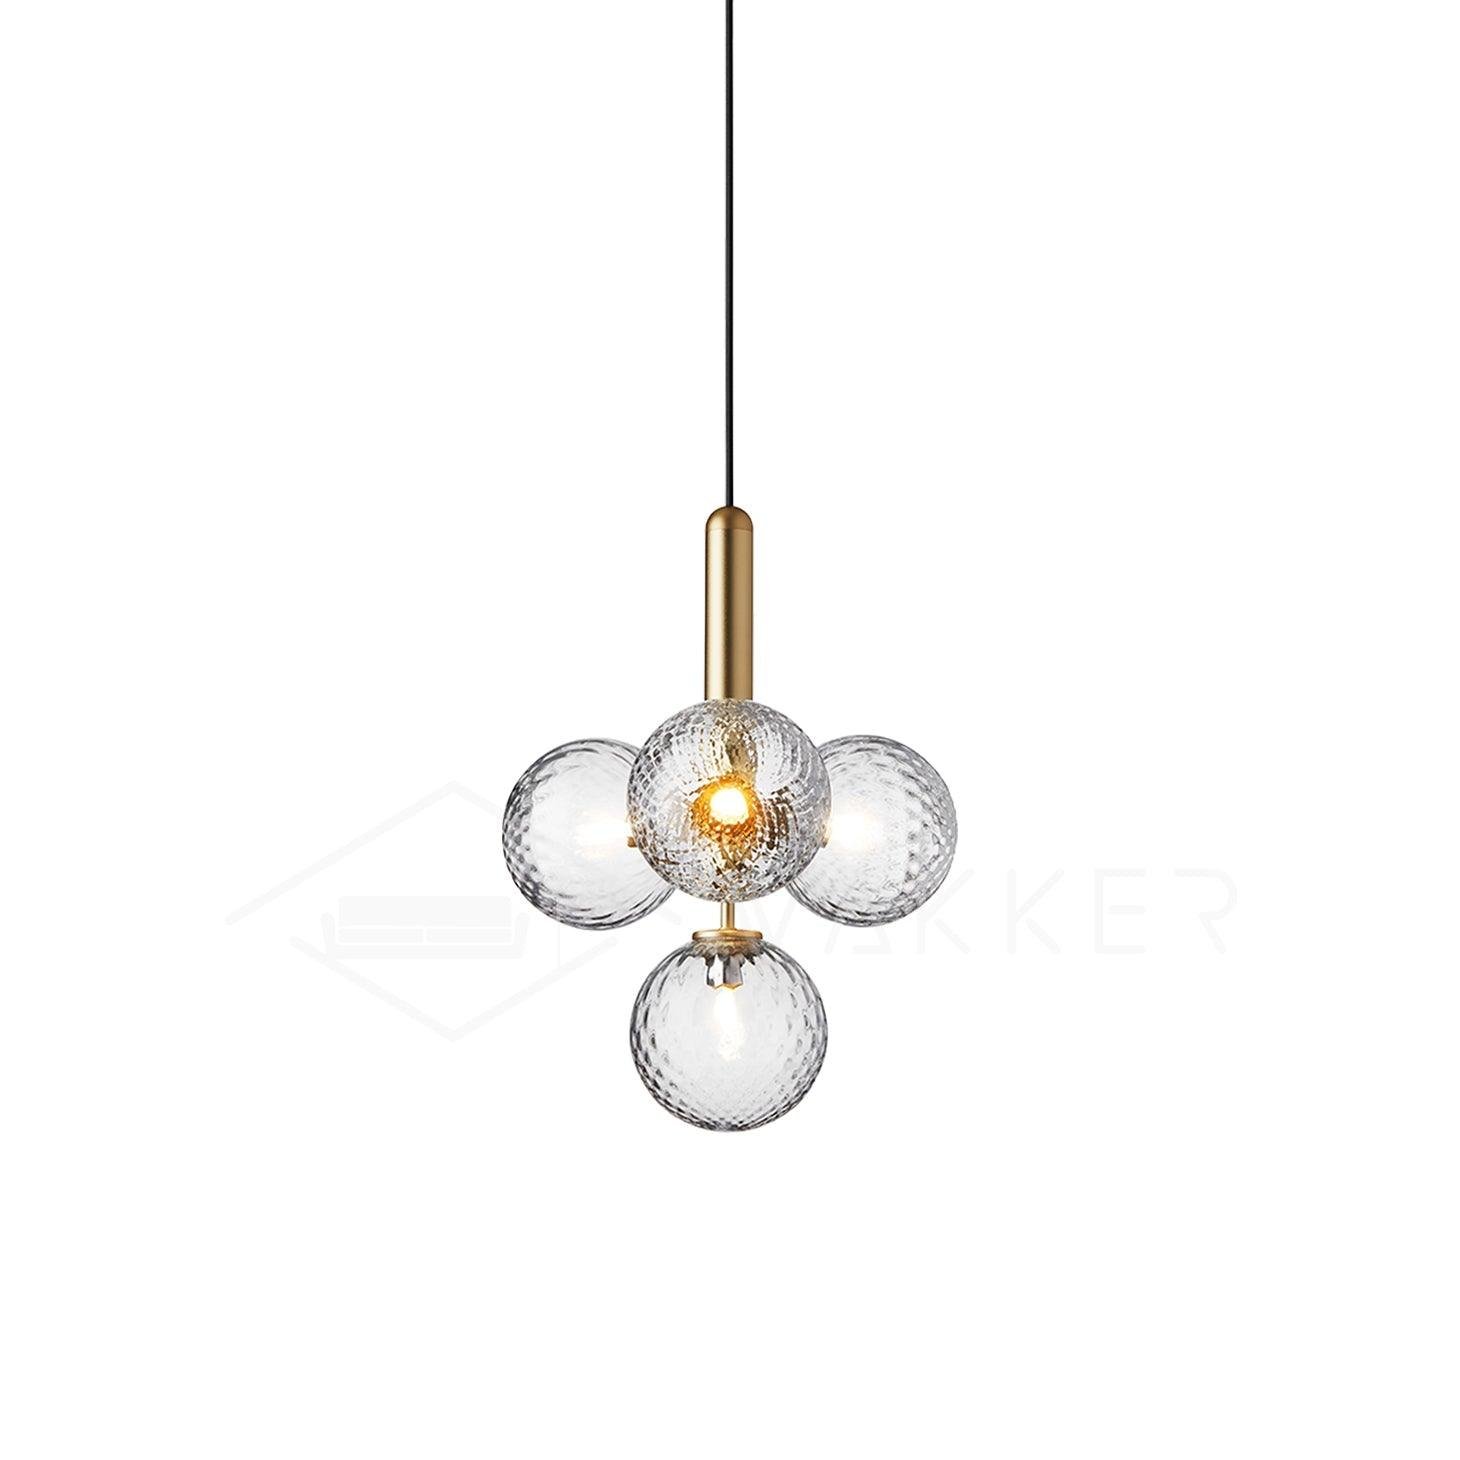 Miira Brass Pendant Light with 5 Heads, Diameter 13.8 inches and Height 17 inches (35cm x 43cm), Brass Material, Clear Shade